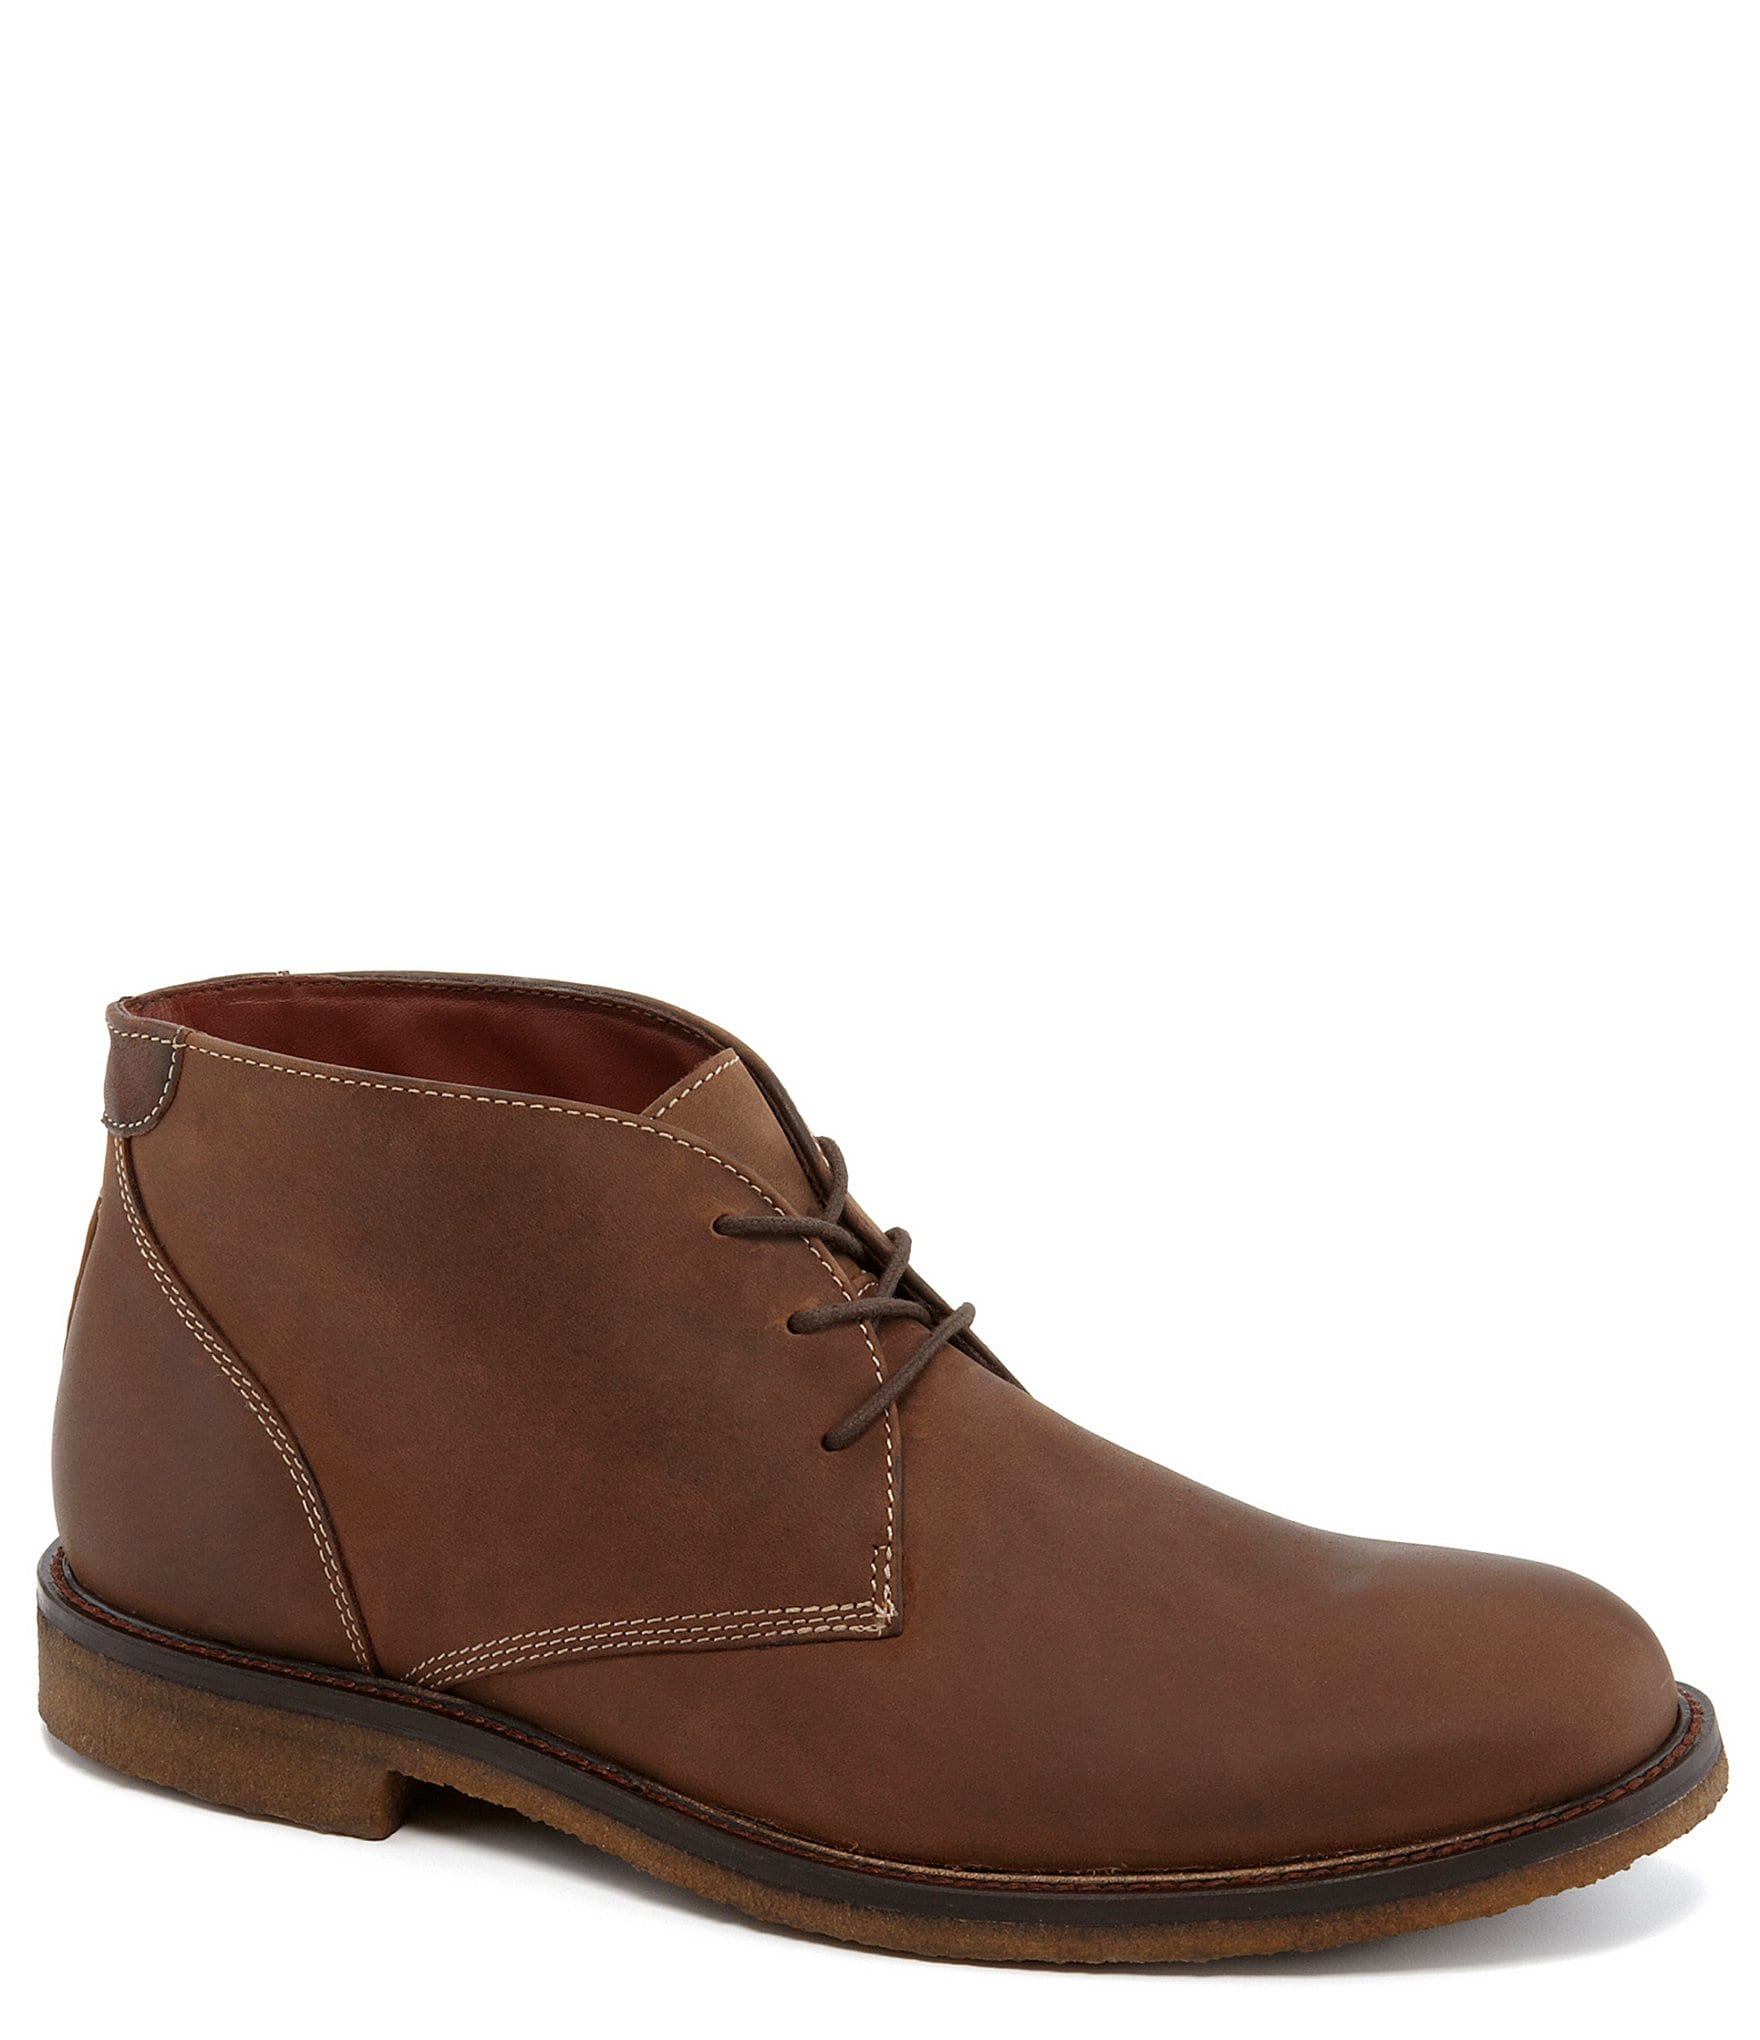 men's johnston and murphy boots